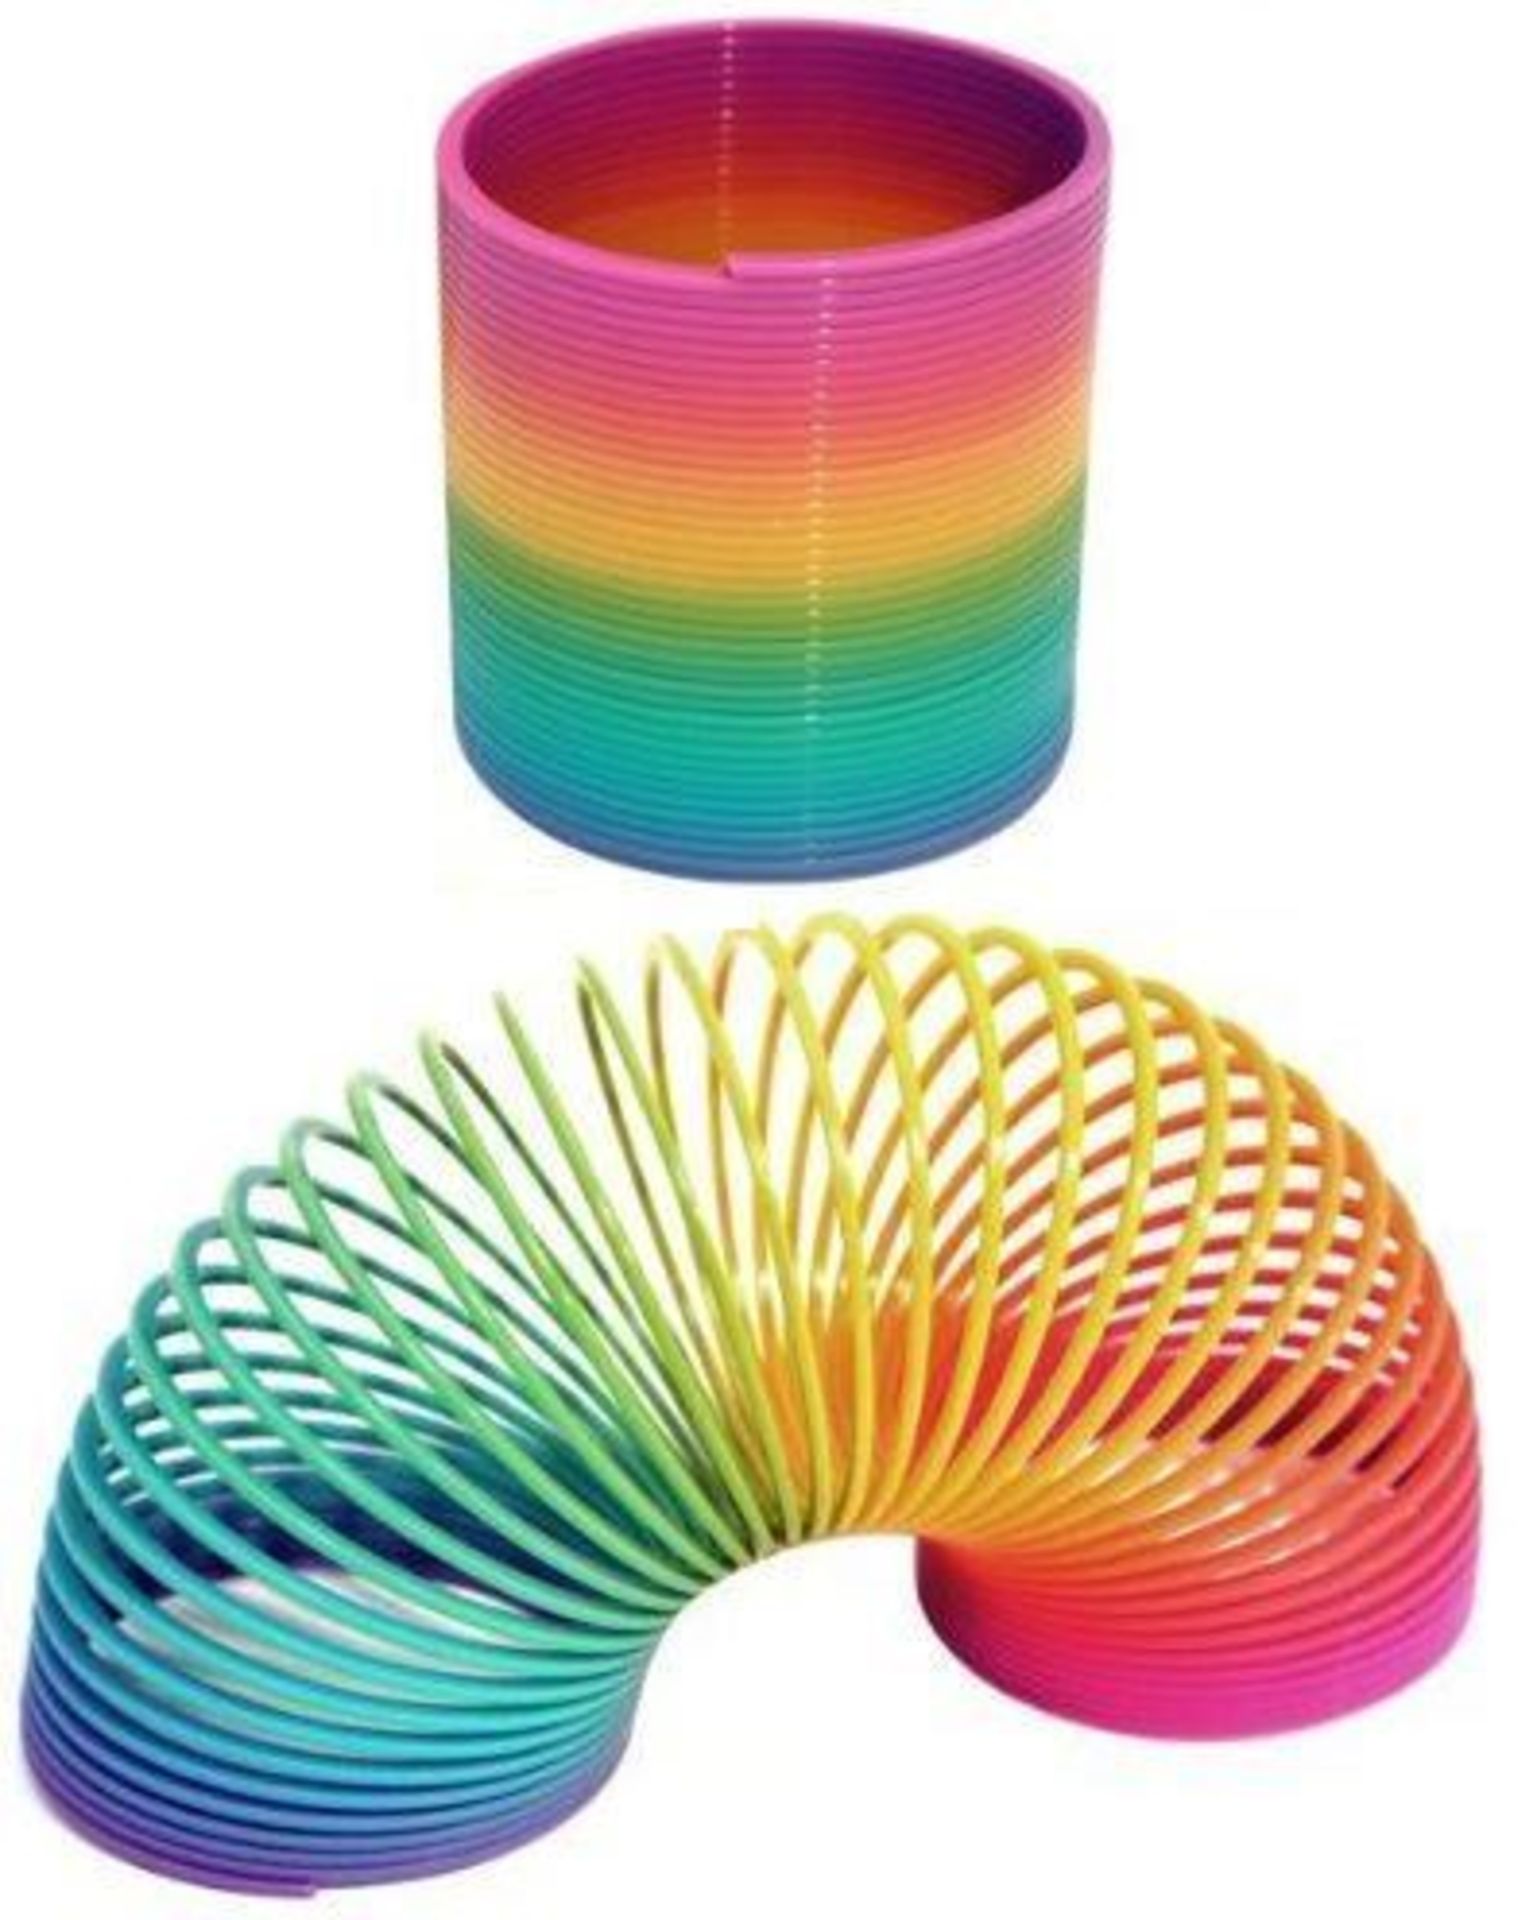 192 x Retro Toys 6.5cm Rainbow Slinky Springs - Brand New Boxed Stock - Approx RRP £1,150 - Supplied